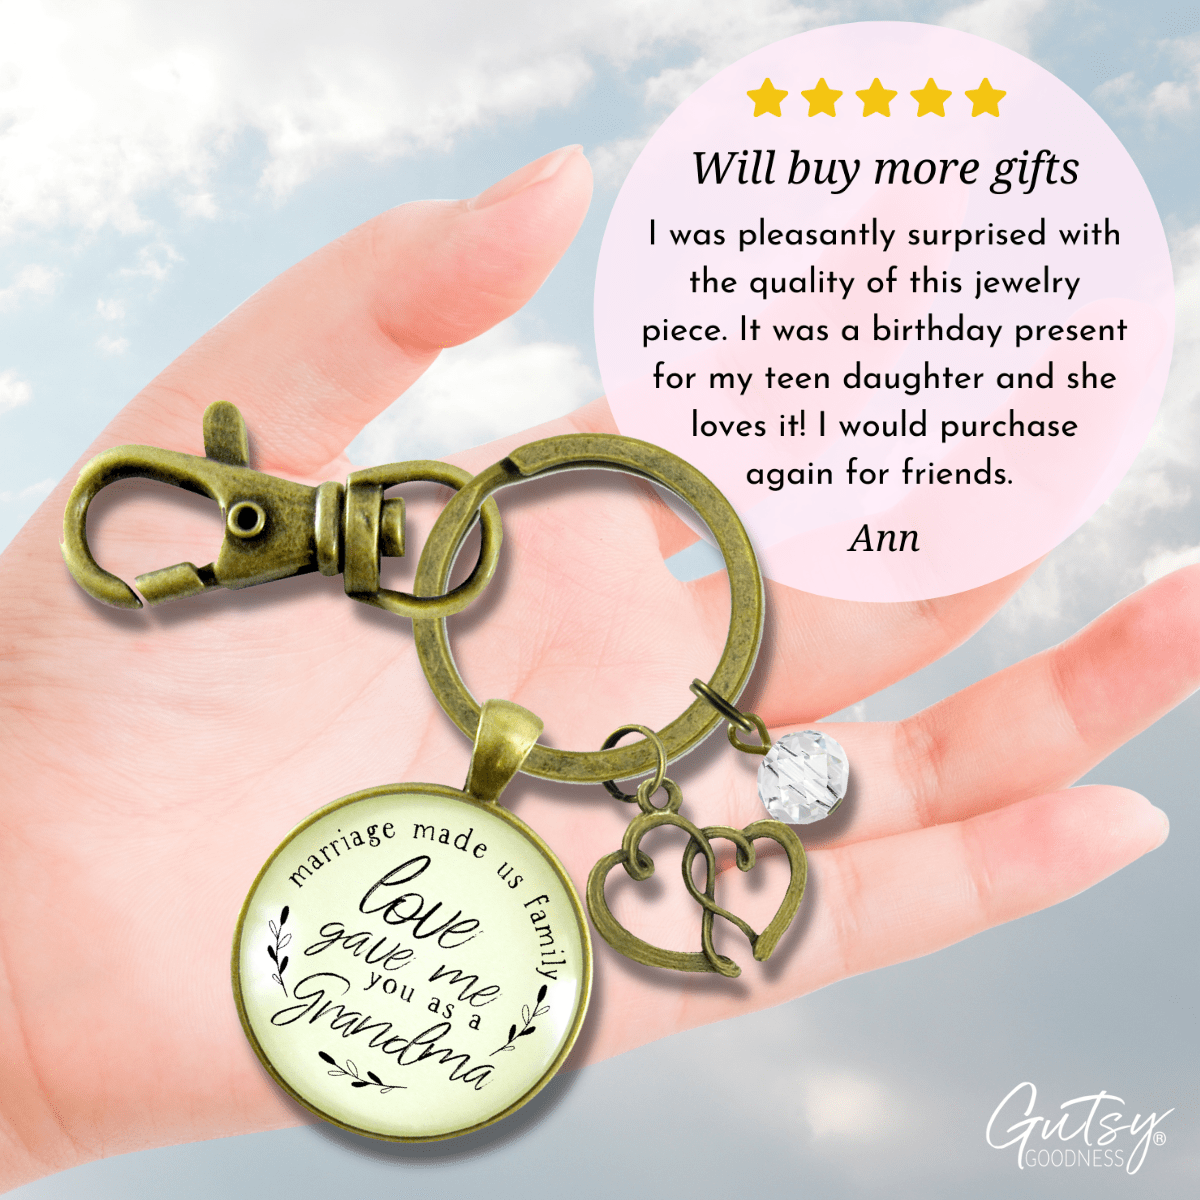 Grandma Gift For Wedding Keychain Marriage Made Us Family Love Made You Grandmother Jewelry Heart - Gutsy Goodness Handmade Jewelry;Grandma Gift For Wedding Keychain Marriage Made Us Family Love Made You Grandmother Jewelry Heart - Gutsy Goodness Handmade Jewelry Gifts